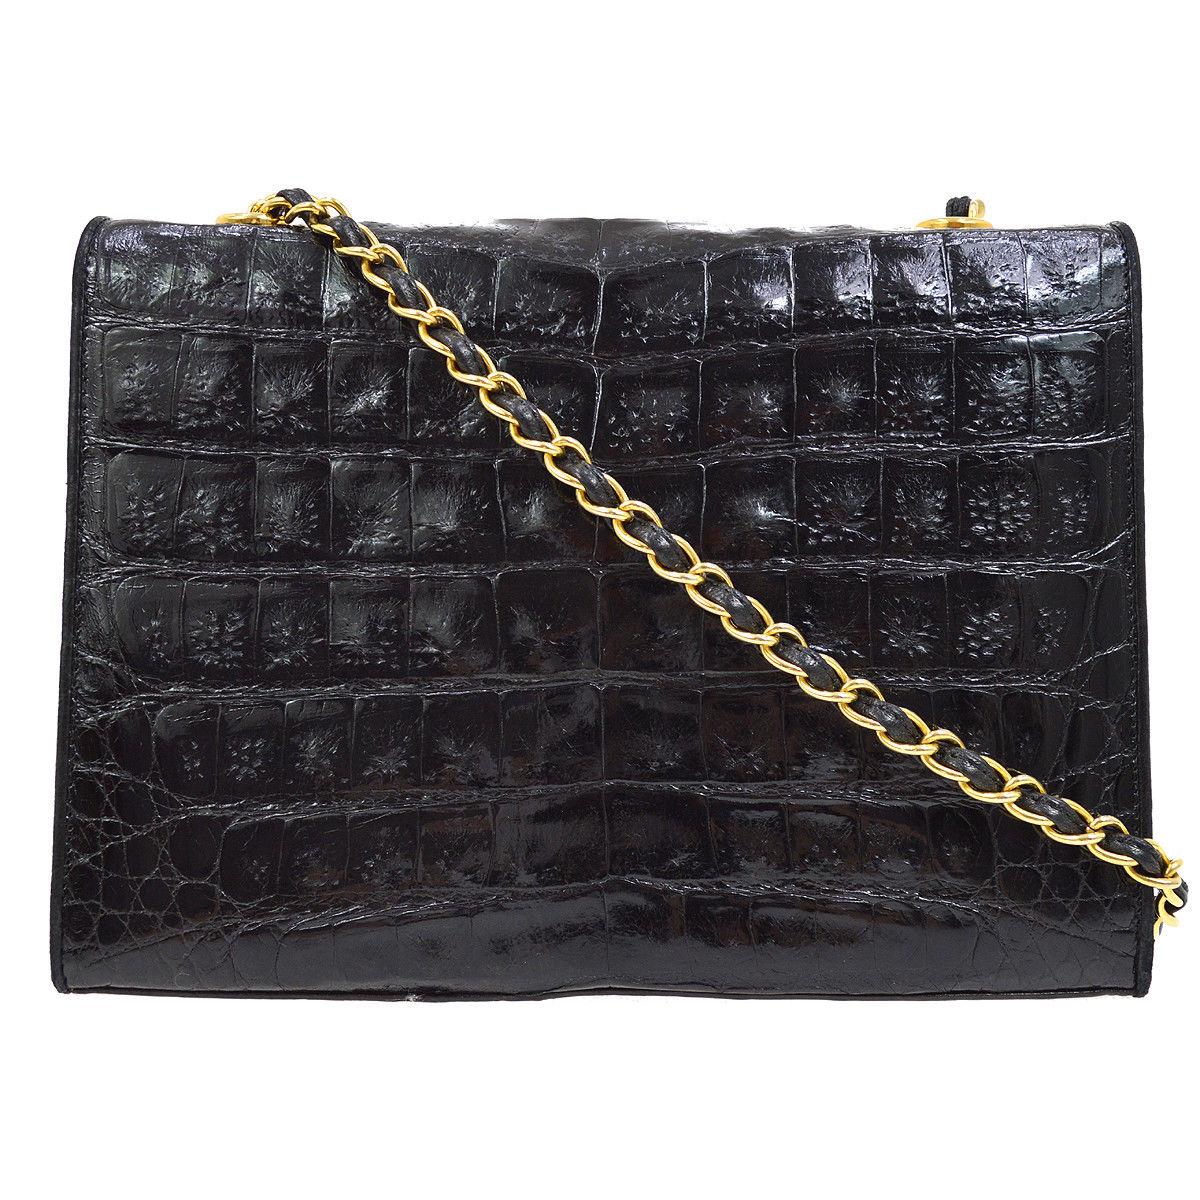 Women's Chanel Crocodile Leather Gold Evening Small Party Shoulder Flap Bag